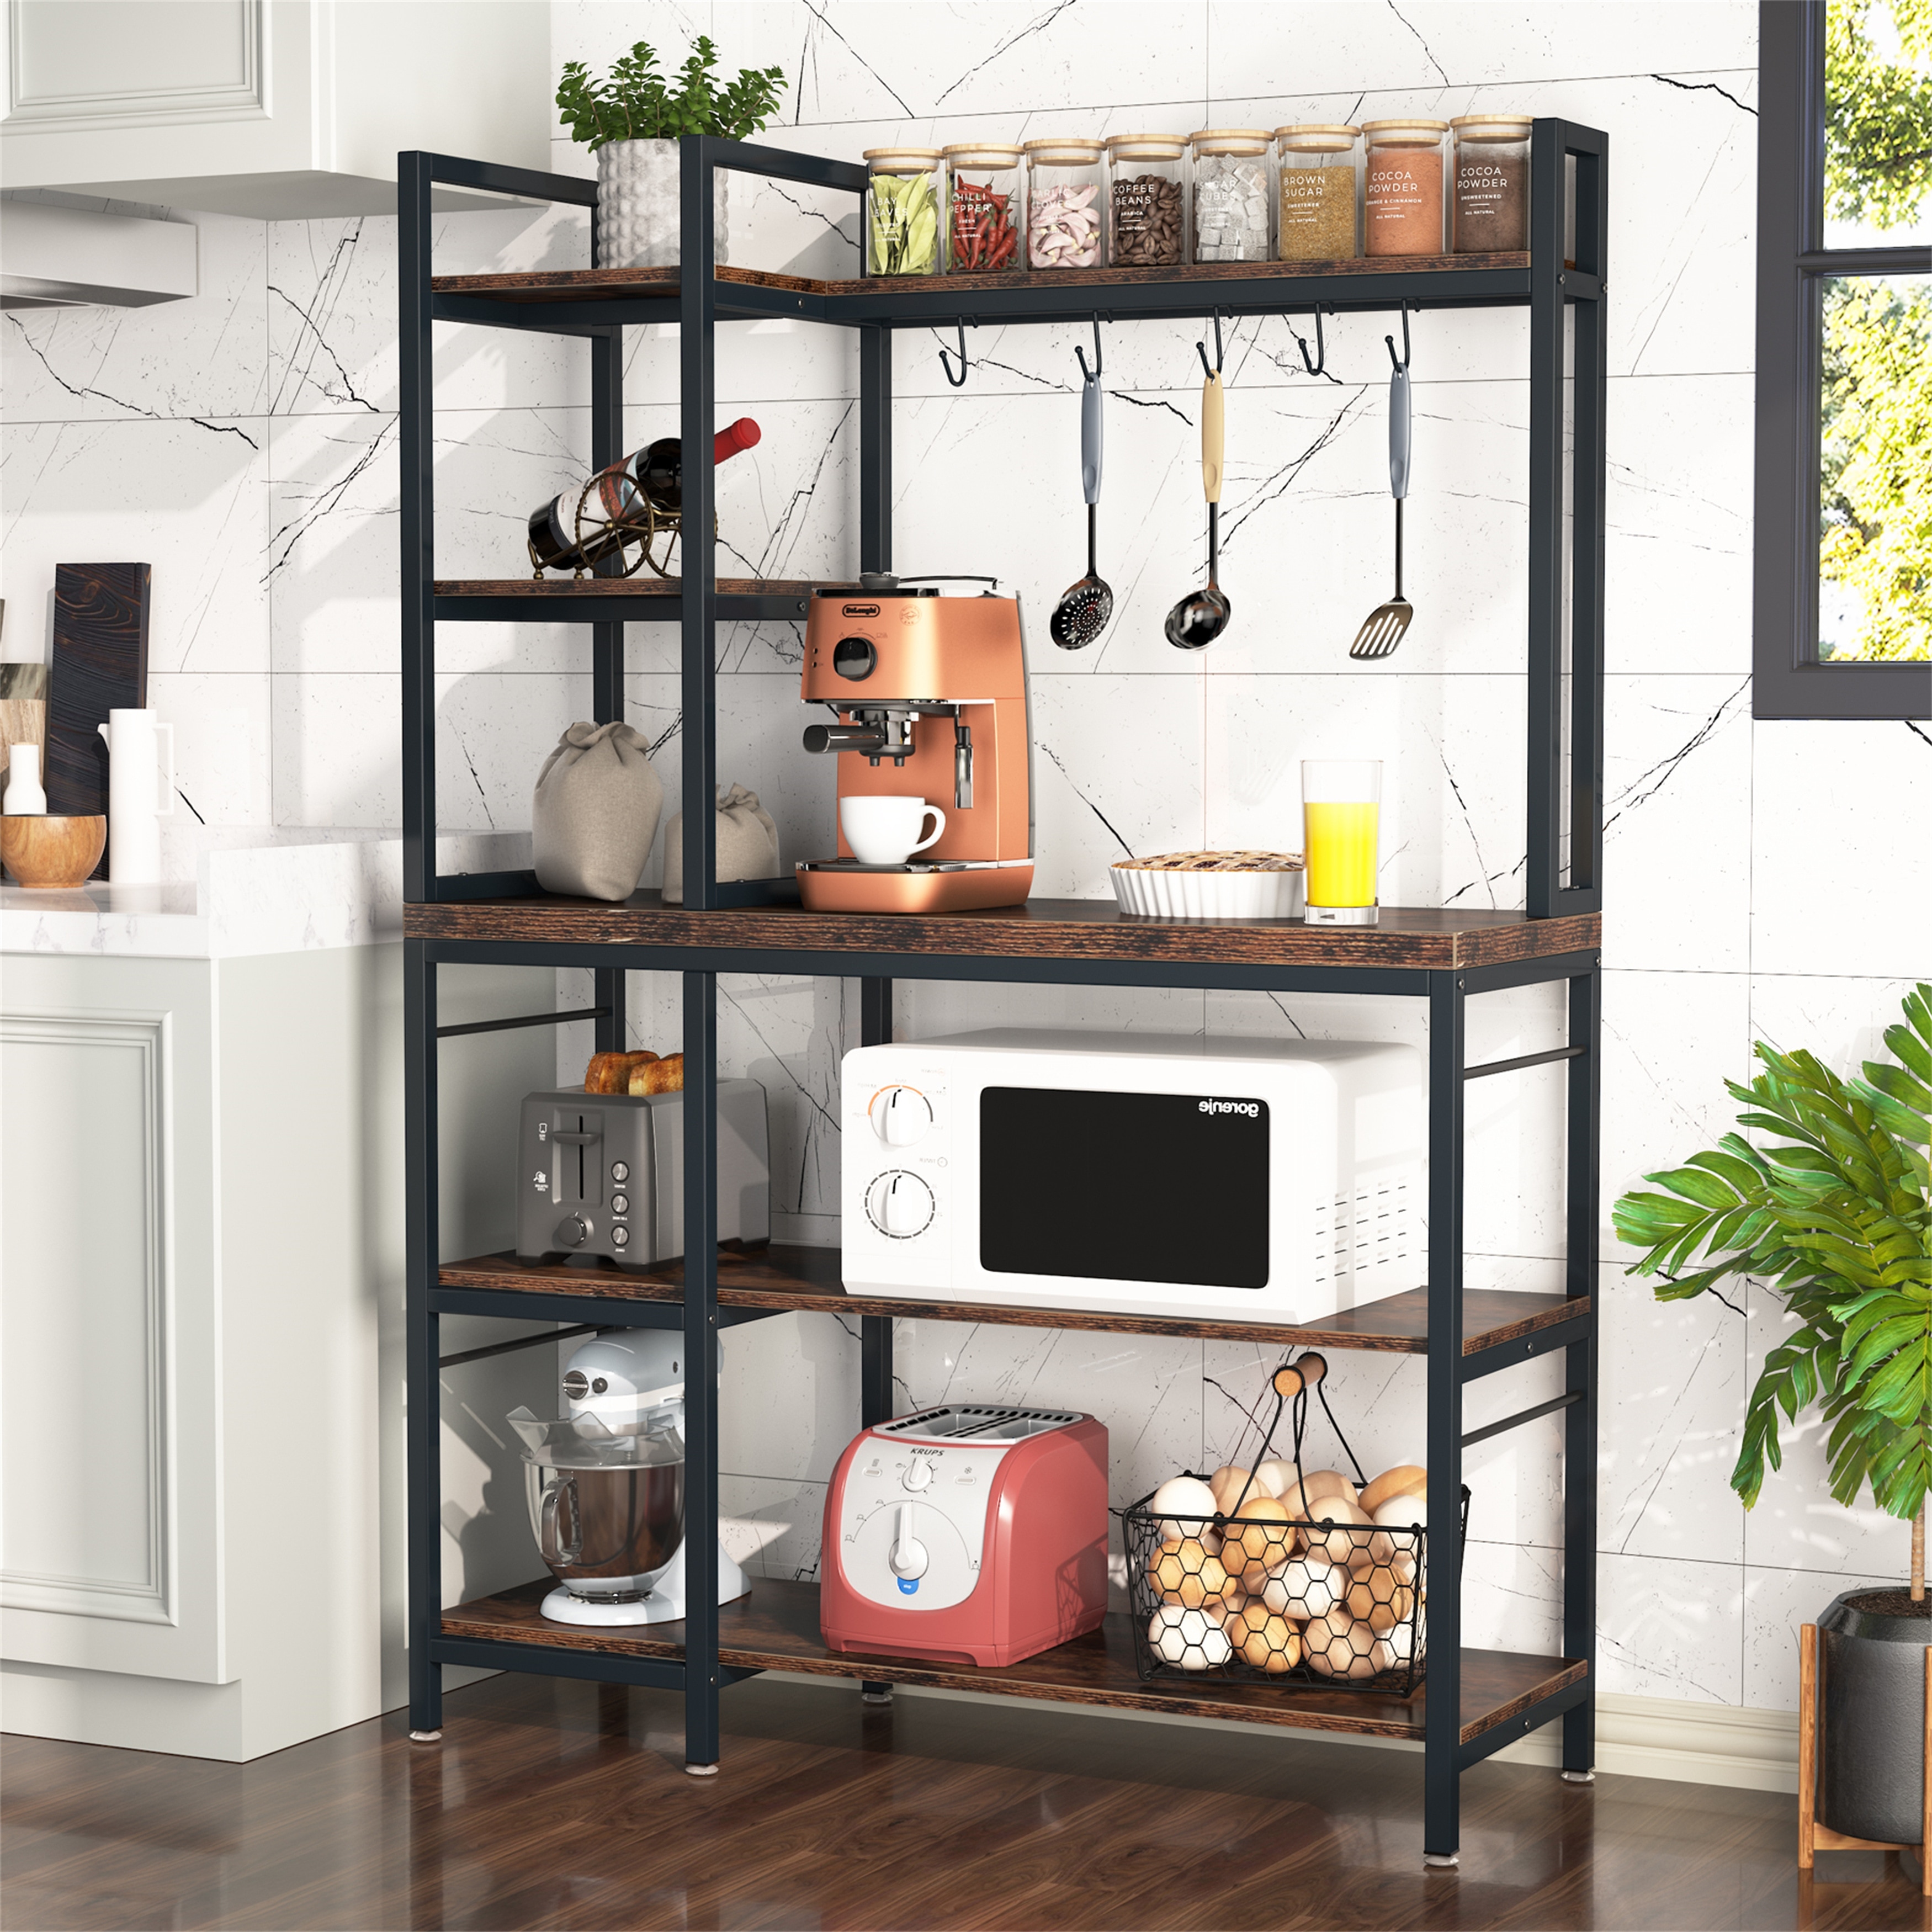 https://ak1.ostkcdn.com/images/products/is/images/direct/e181f6c5002da54bd5387b8c82dce21afd8be590/Bakers-Rack%2C-Kitchen-Organizer-Shelves%2C-Microwave-Oven-Stand%2C-5-Tier-Kitchen-Utility-Storage-Shelf.jpg